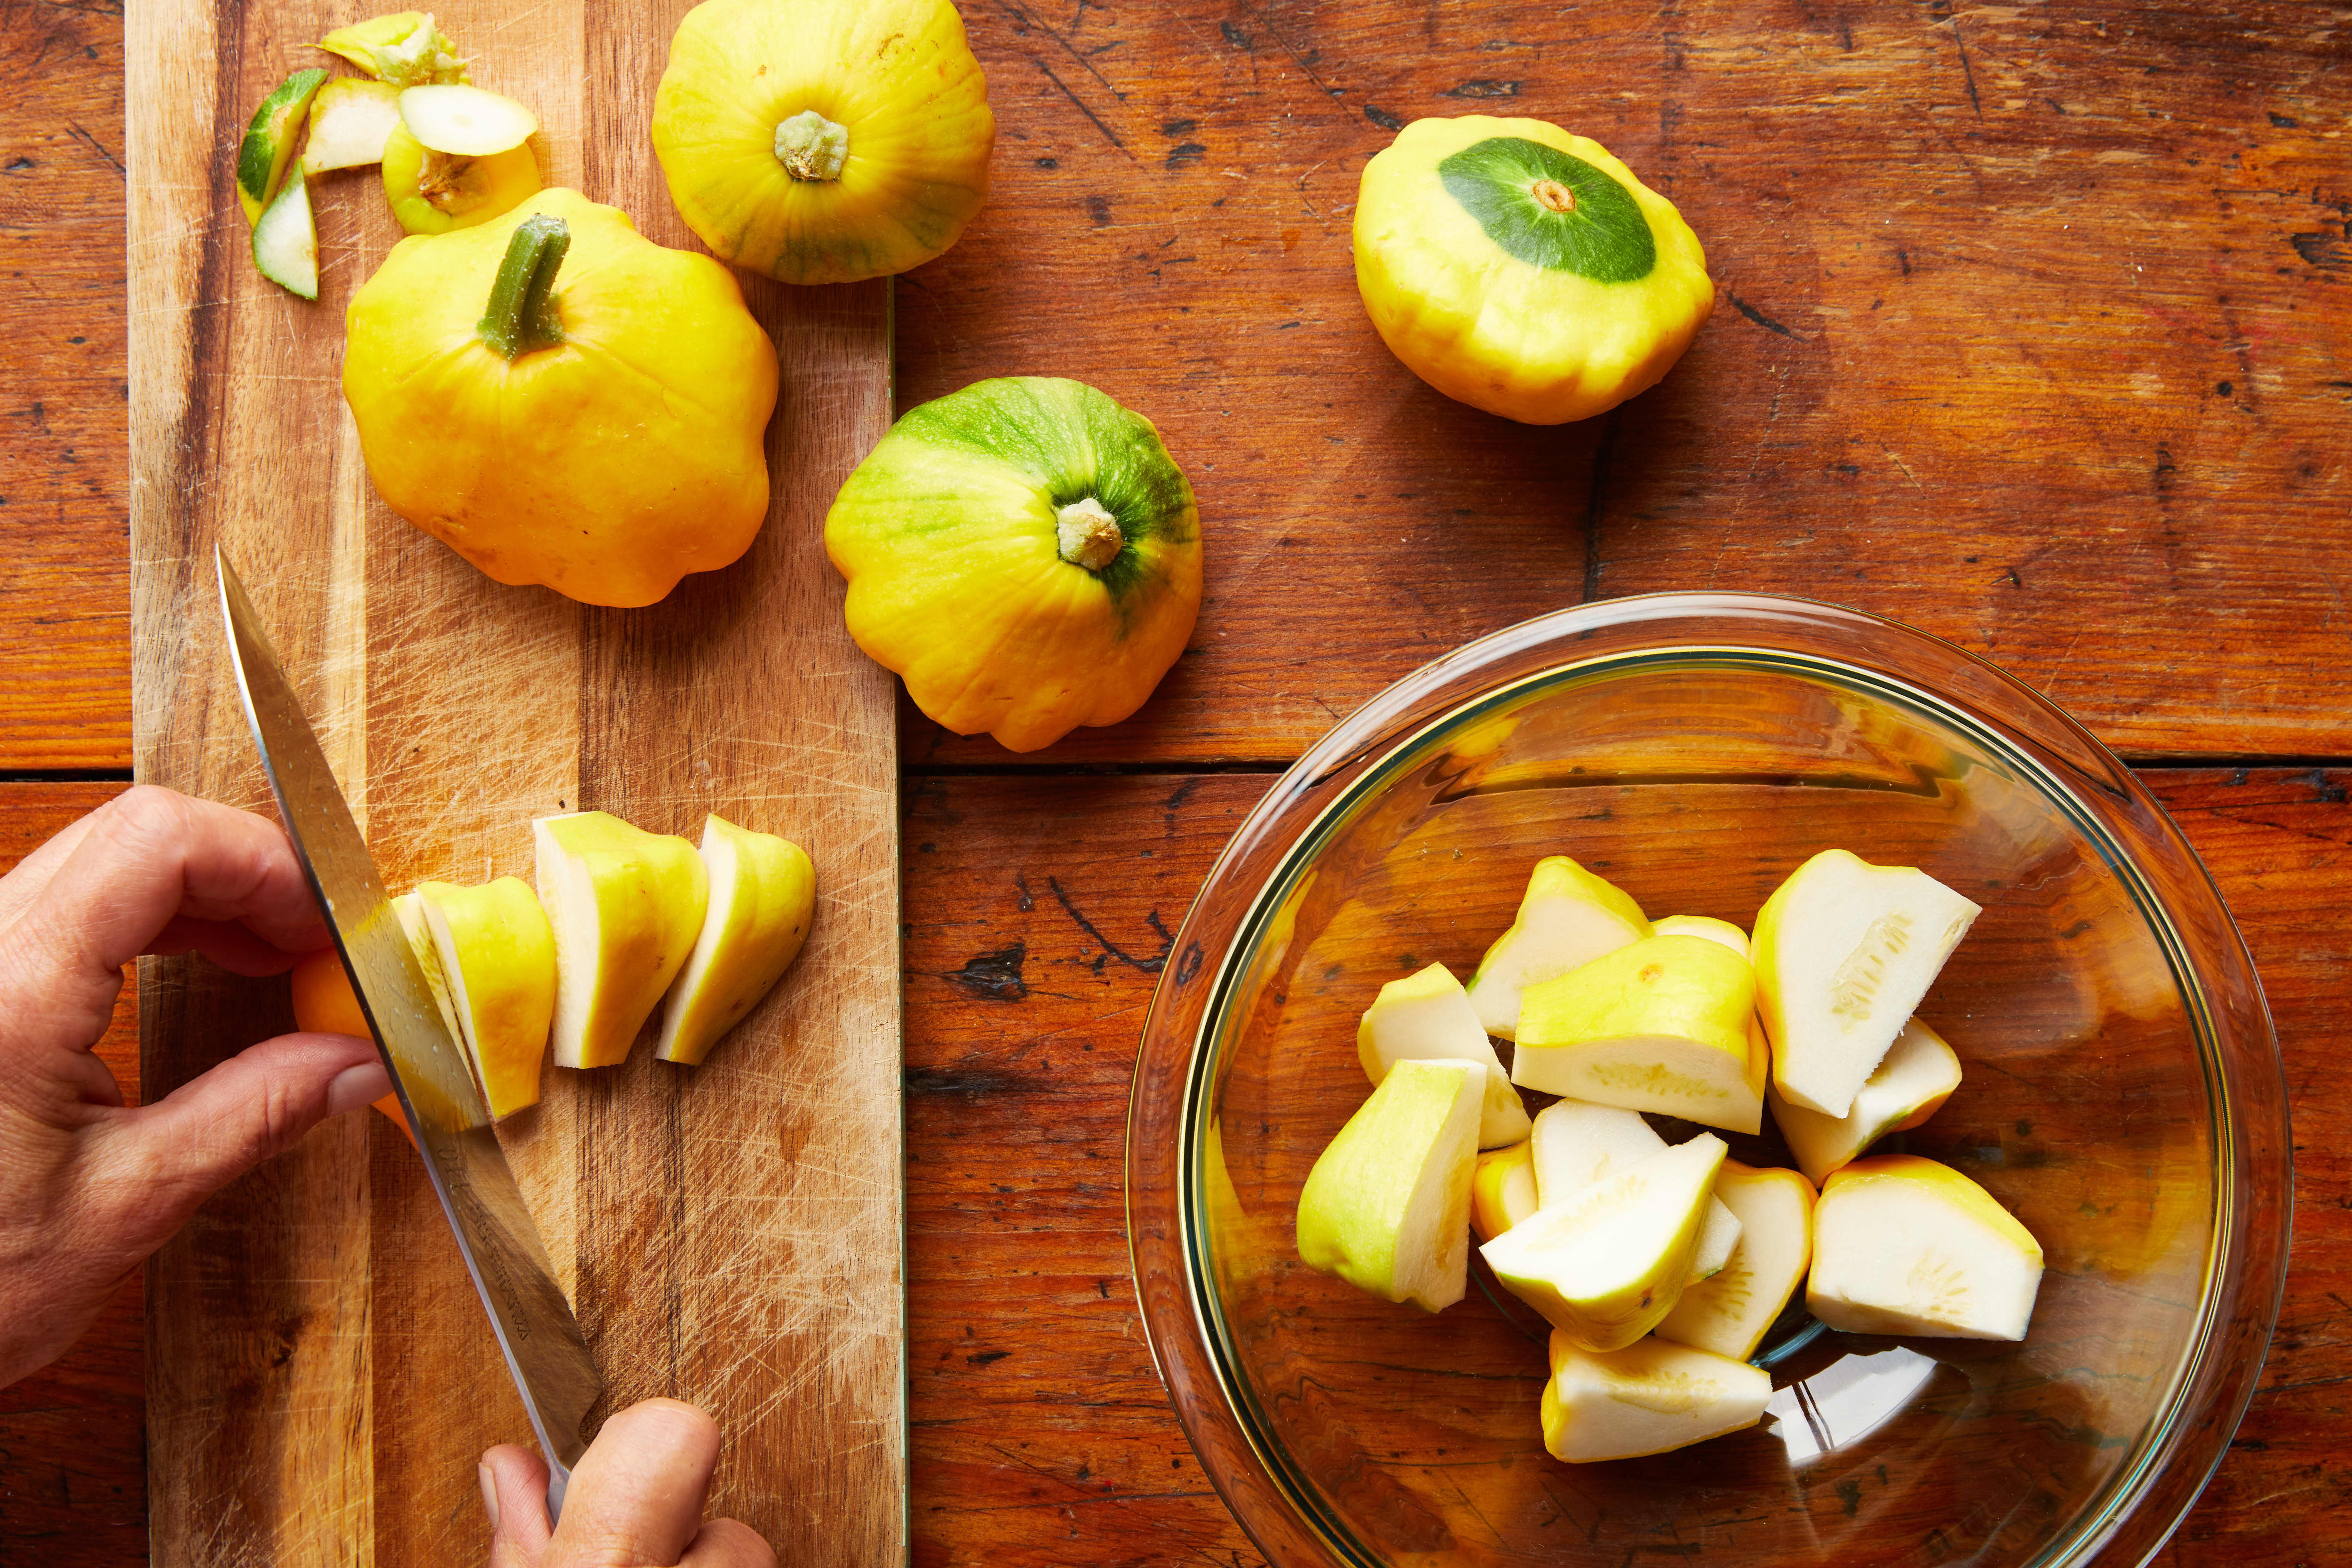 How To Cook Pattypan Squash 3 Simple Recipes Kitchn,Wild Violet